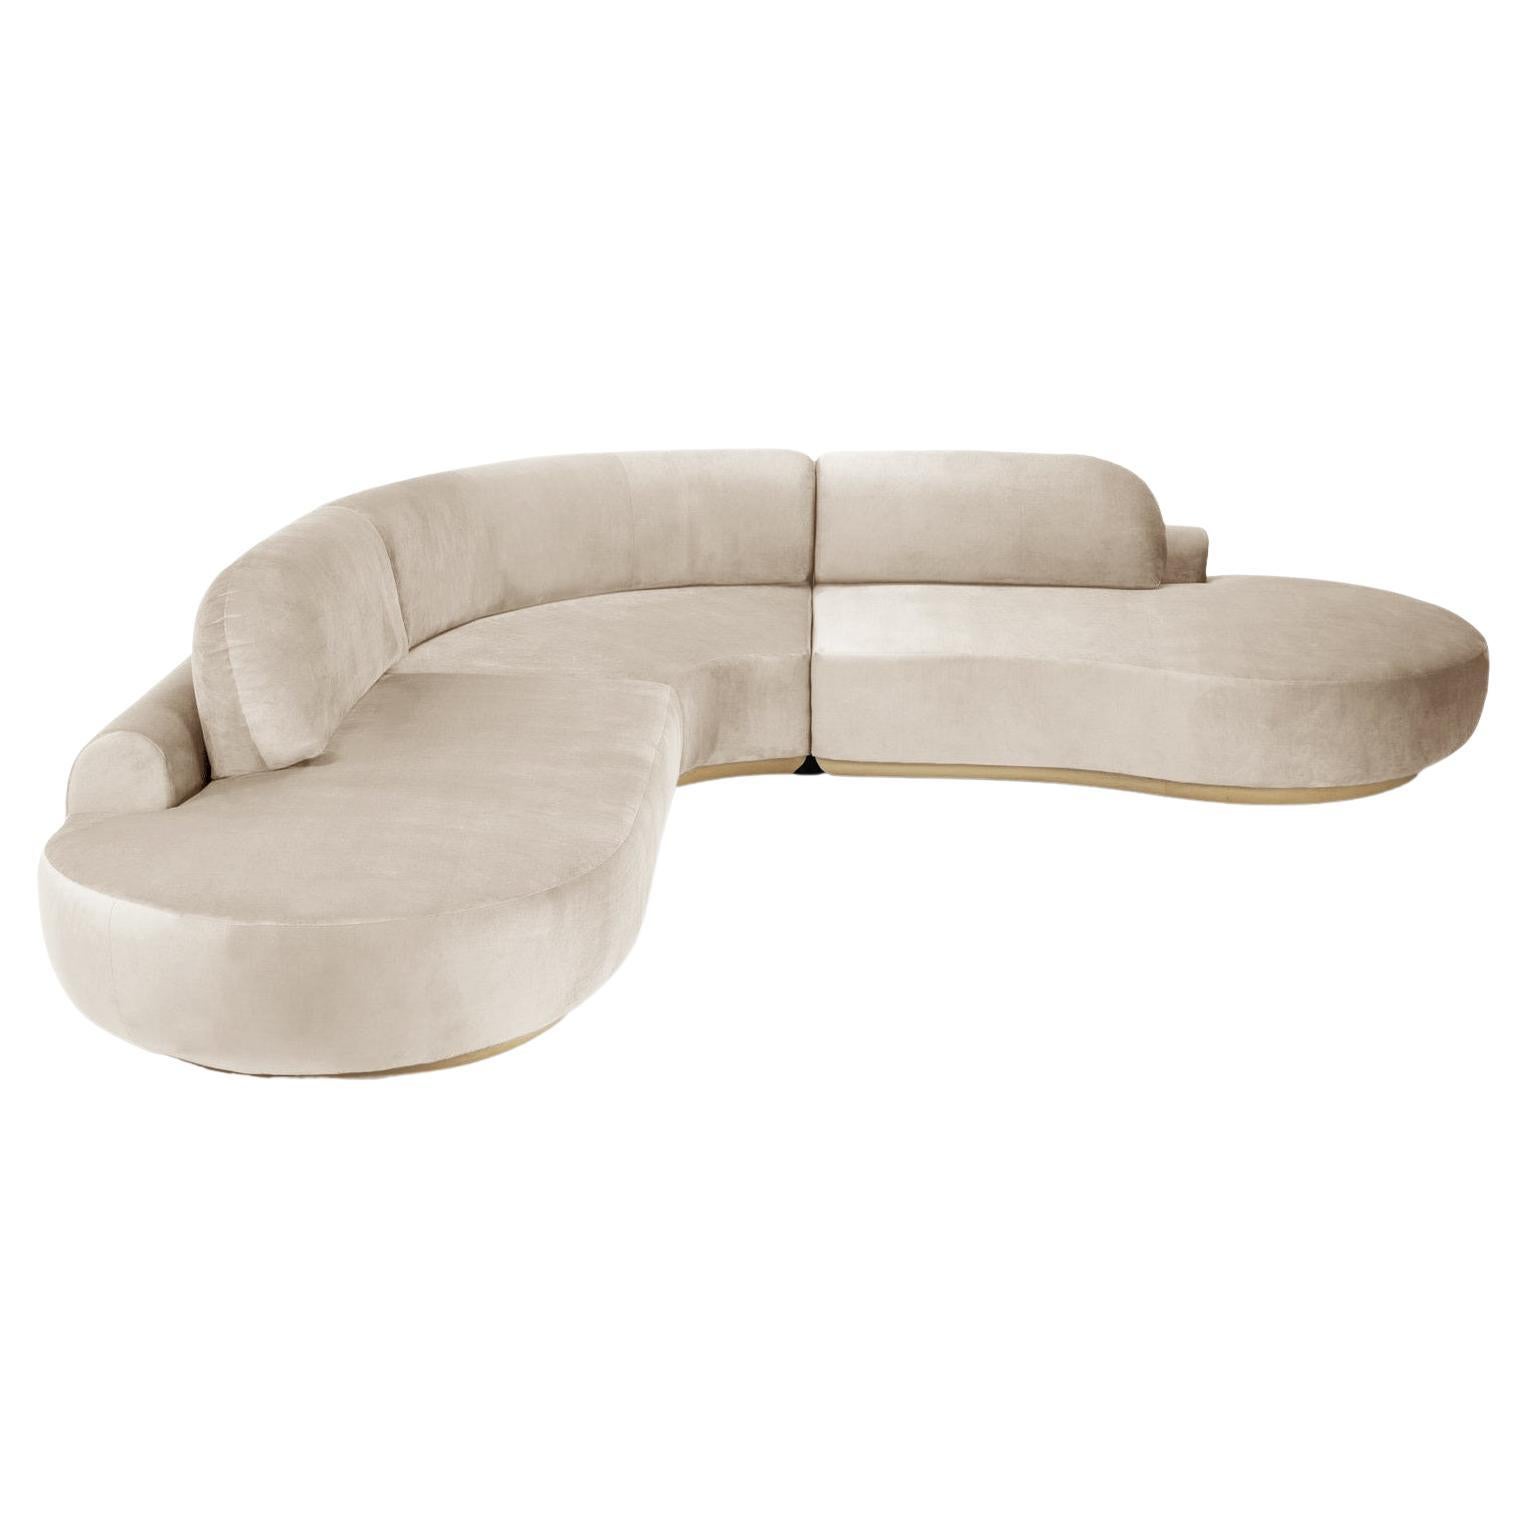 Naked Curved Sectional Sofa, 3 Piece with Natural Oak and Boucle Snow